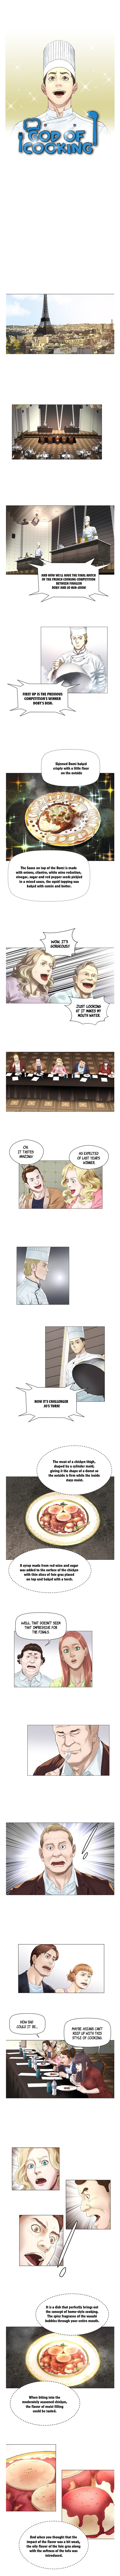 God of Cooking Ch. 1